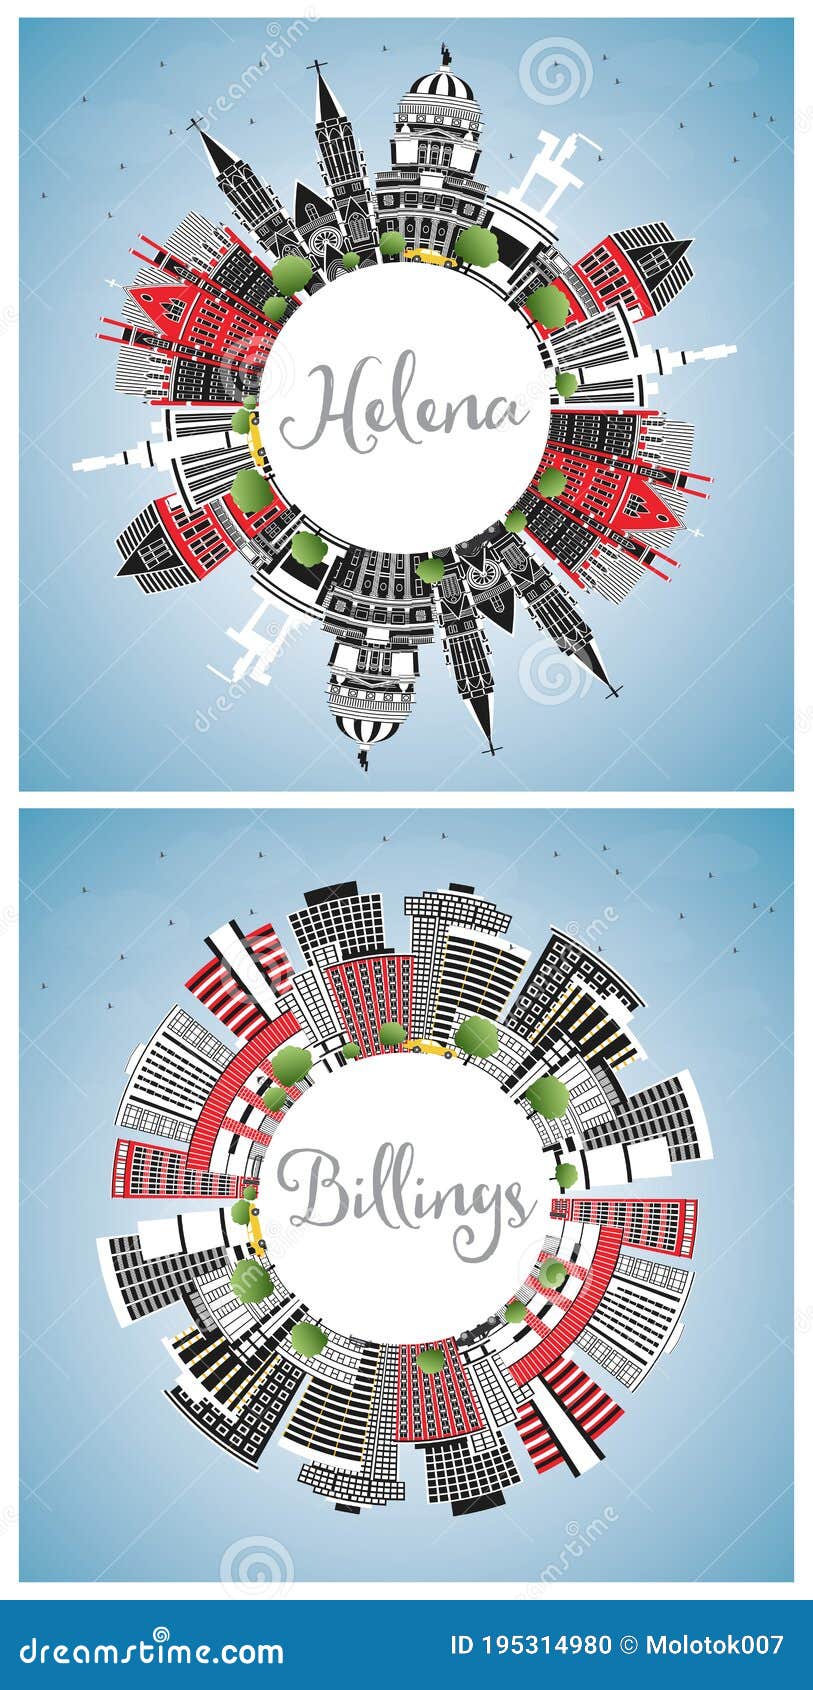 helena and billings montana city skylines set with color buildings, blue sky and copy space